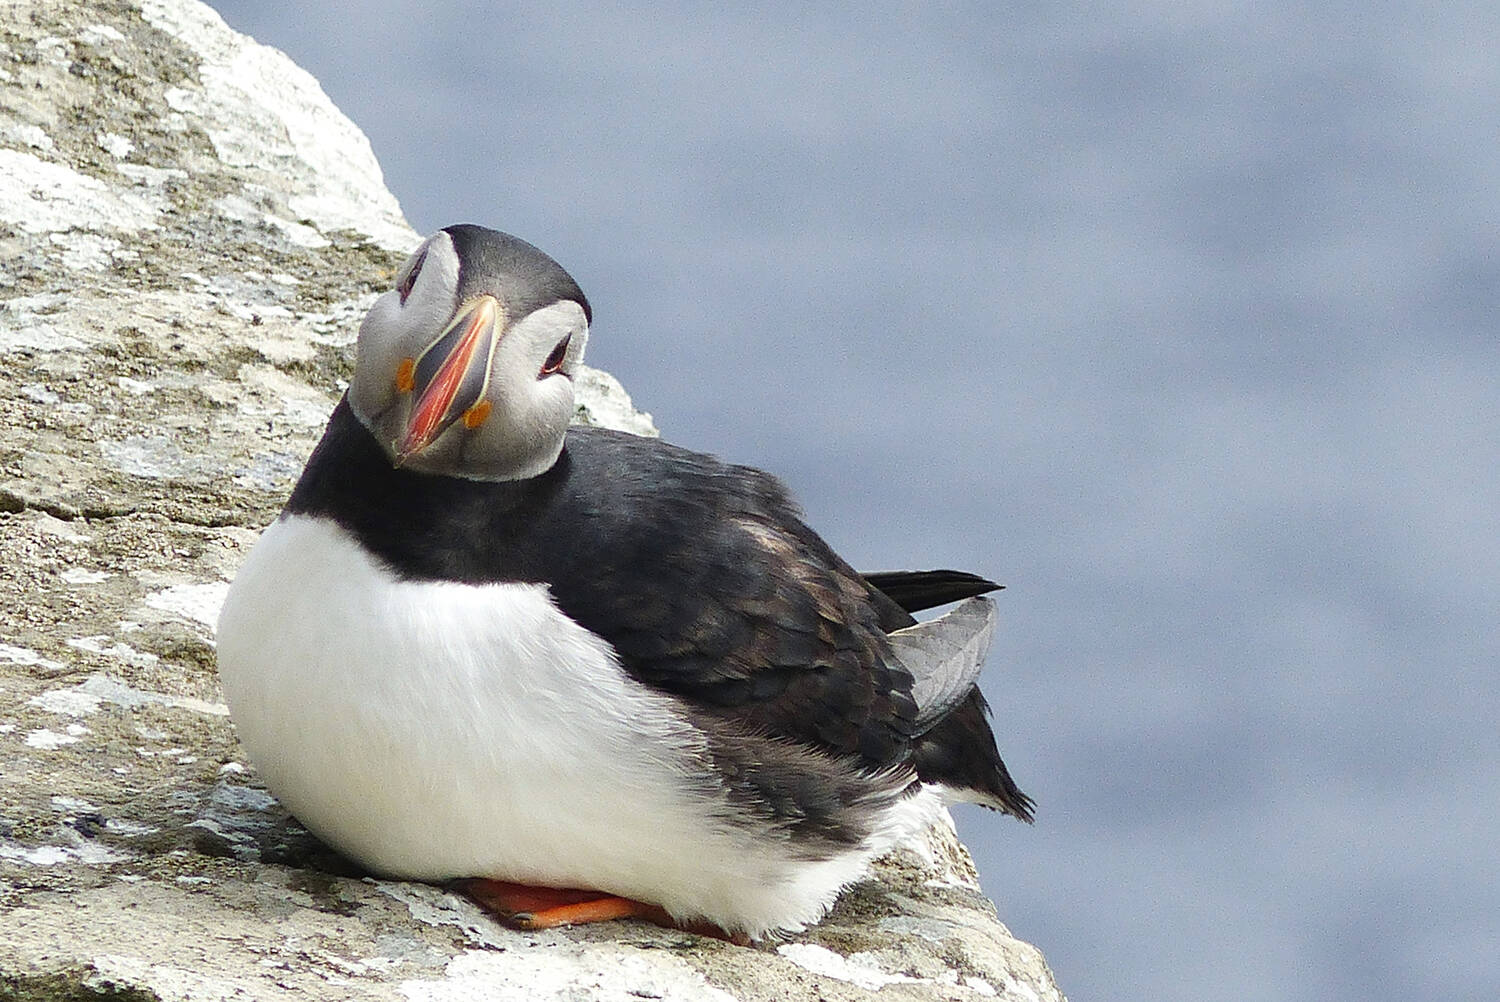 A puffin sits high above the sea on a cliff ledge on Staffa.